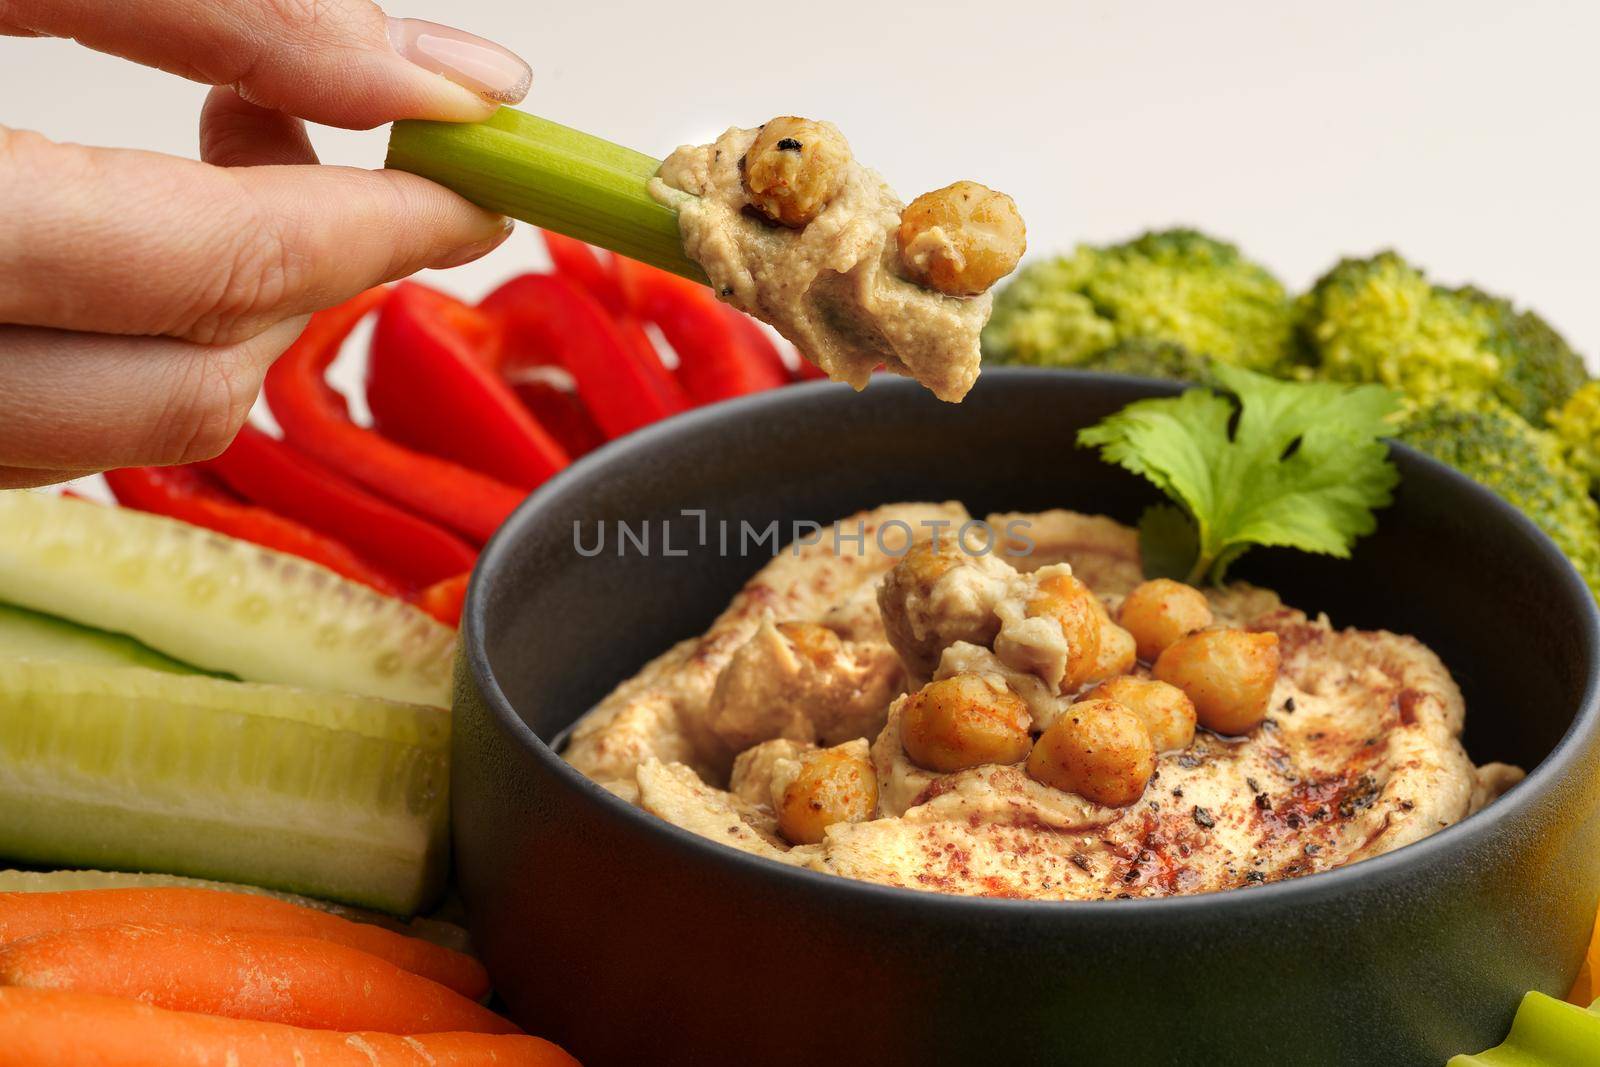 Closeup of woman hand holding celery stick with chickpeas hummus. Tasty hummus with vegetables and smoked paprika. High quality photo